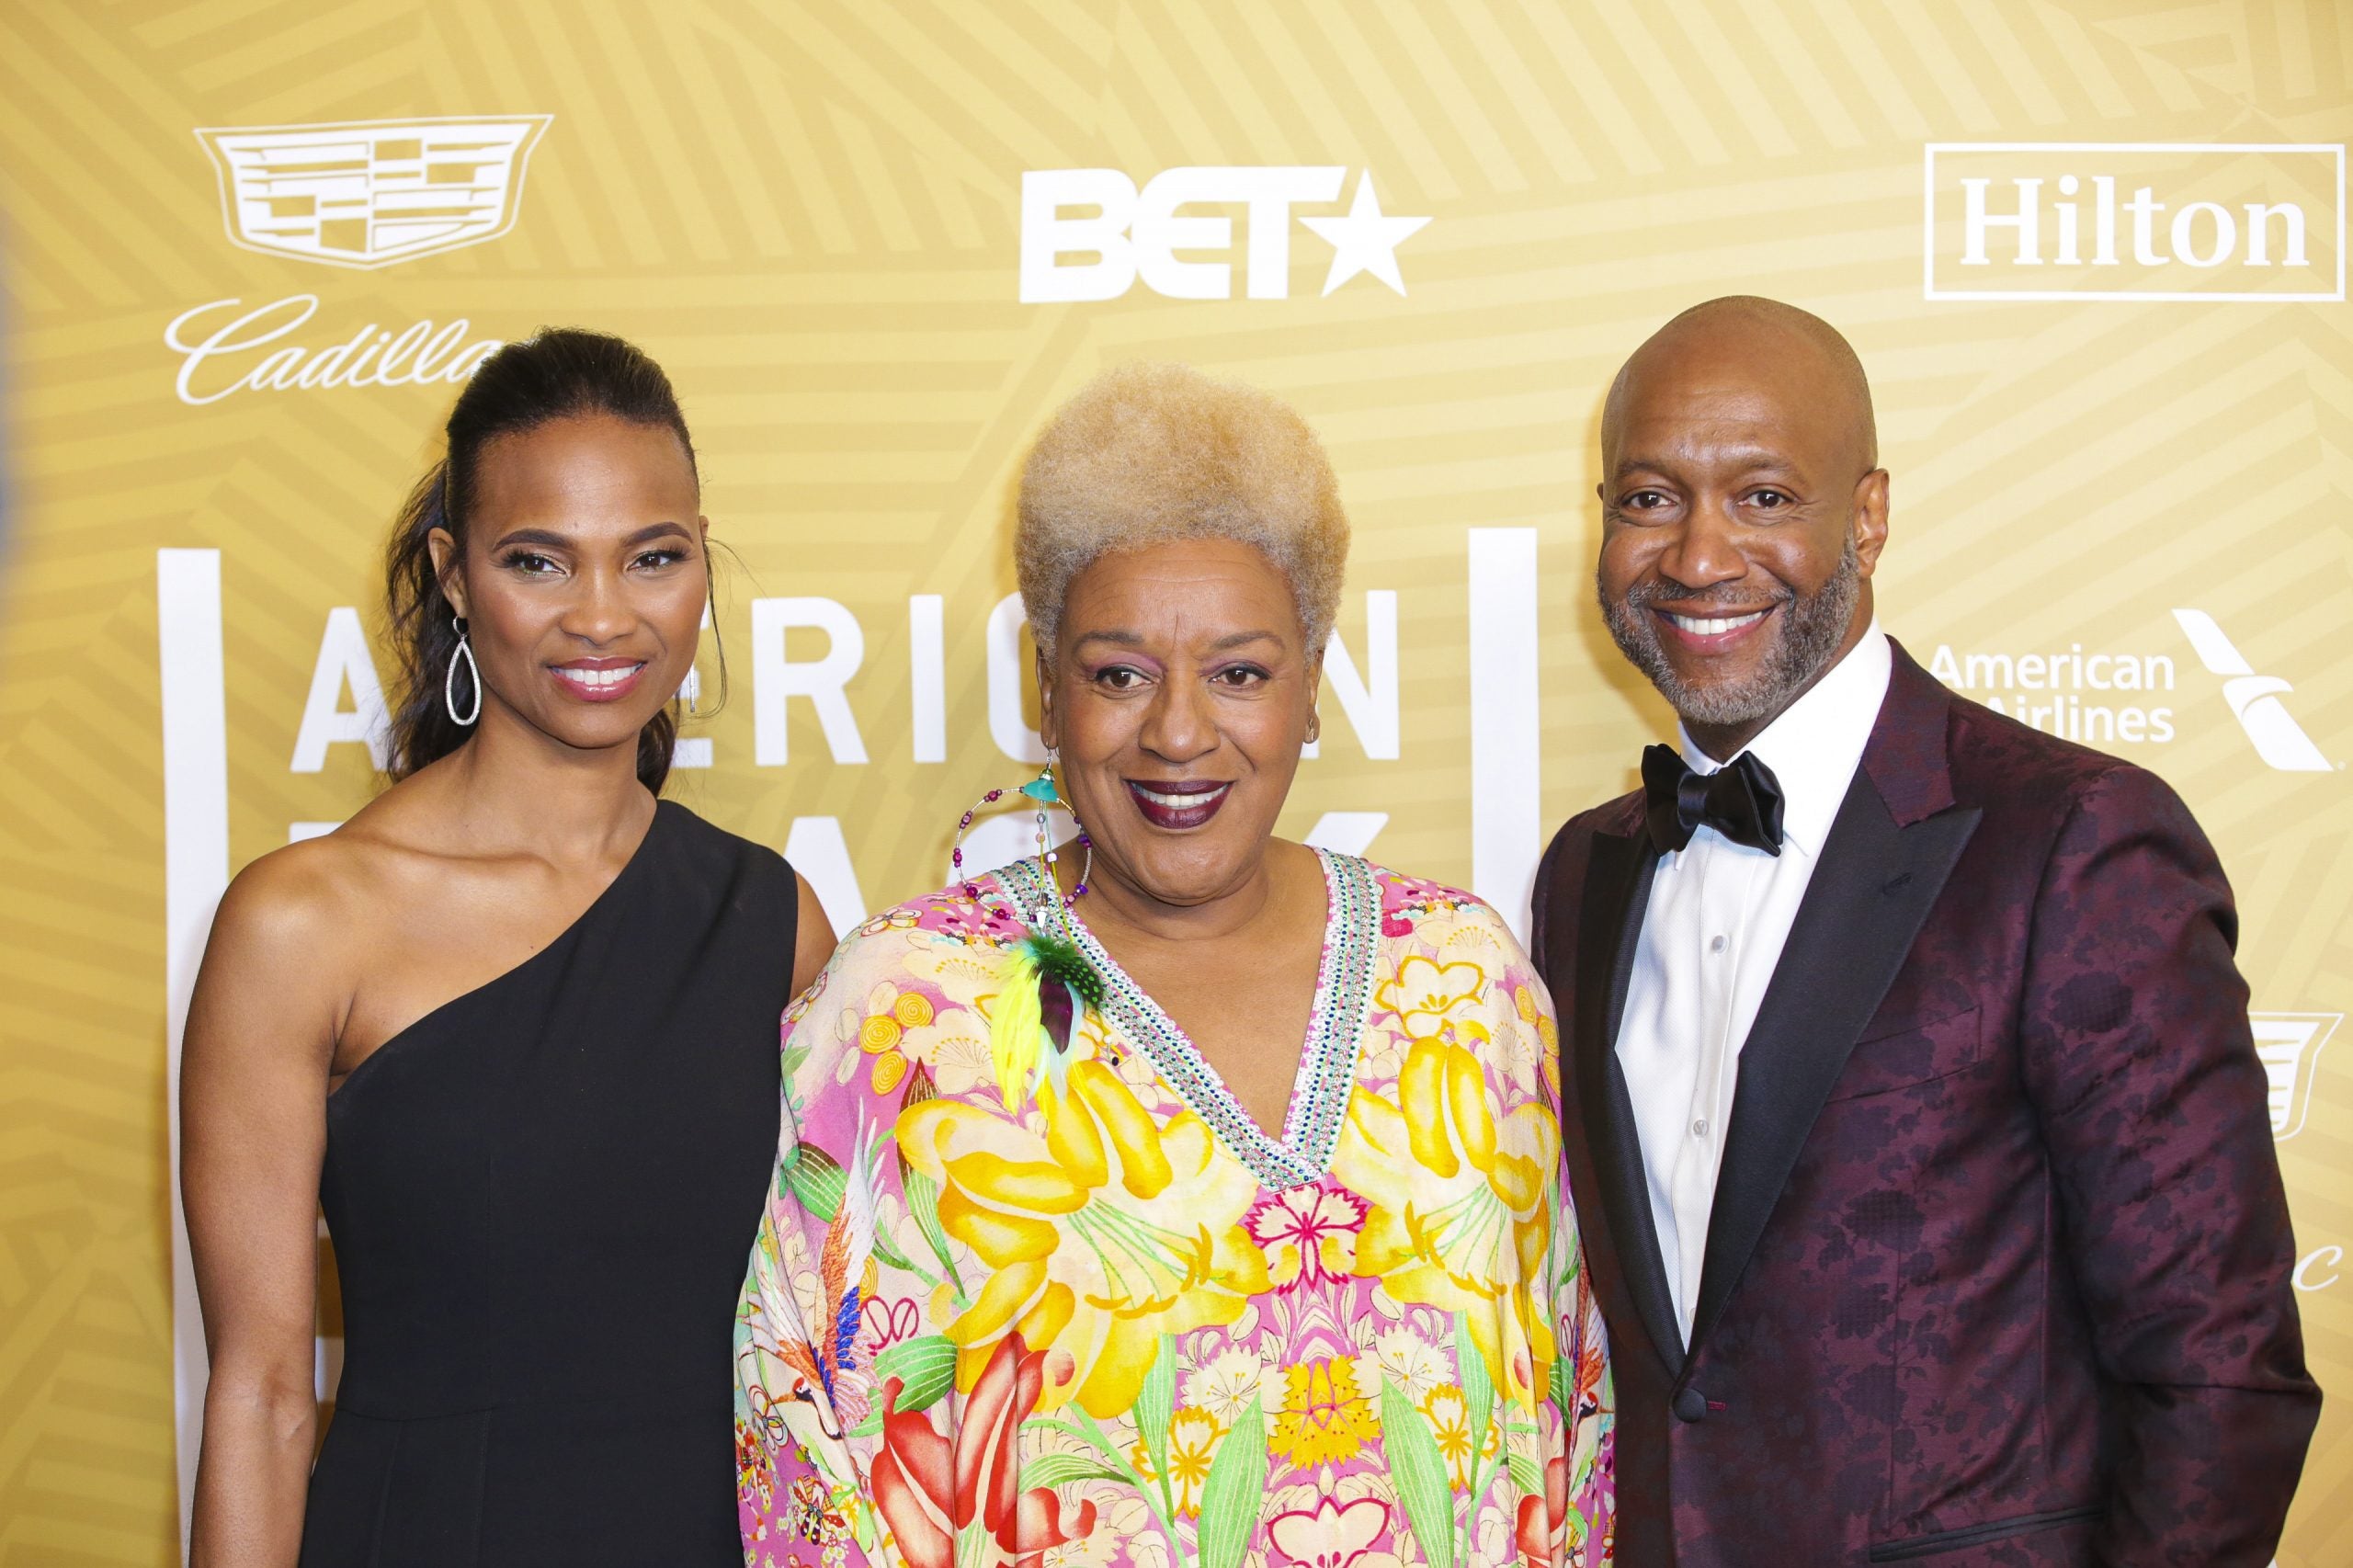 The Stars Shined Bright At The 2020 American Black Film Festival Honors